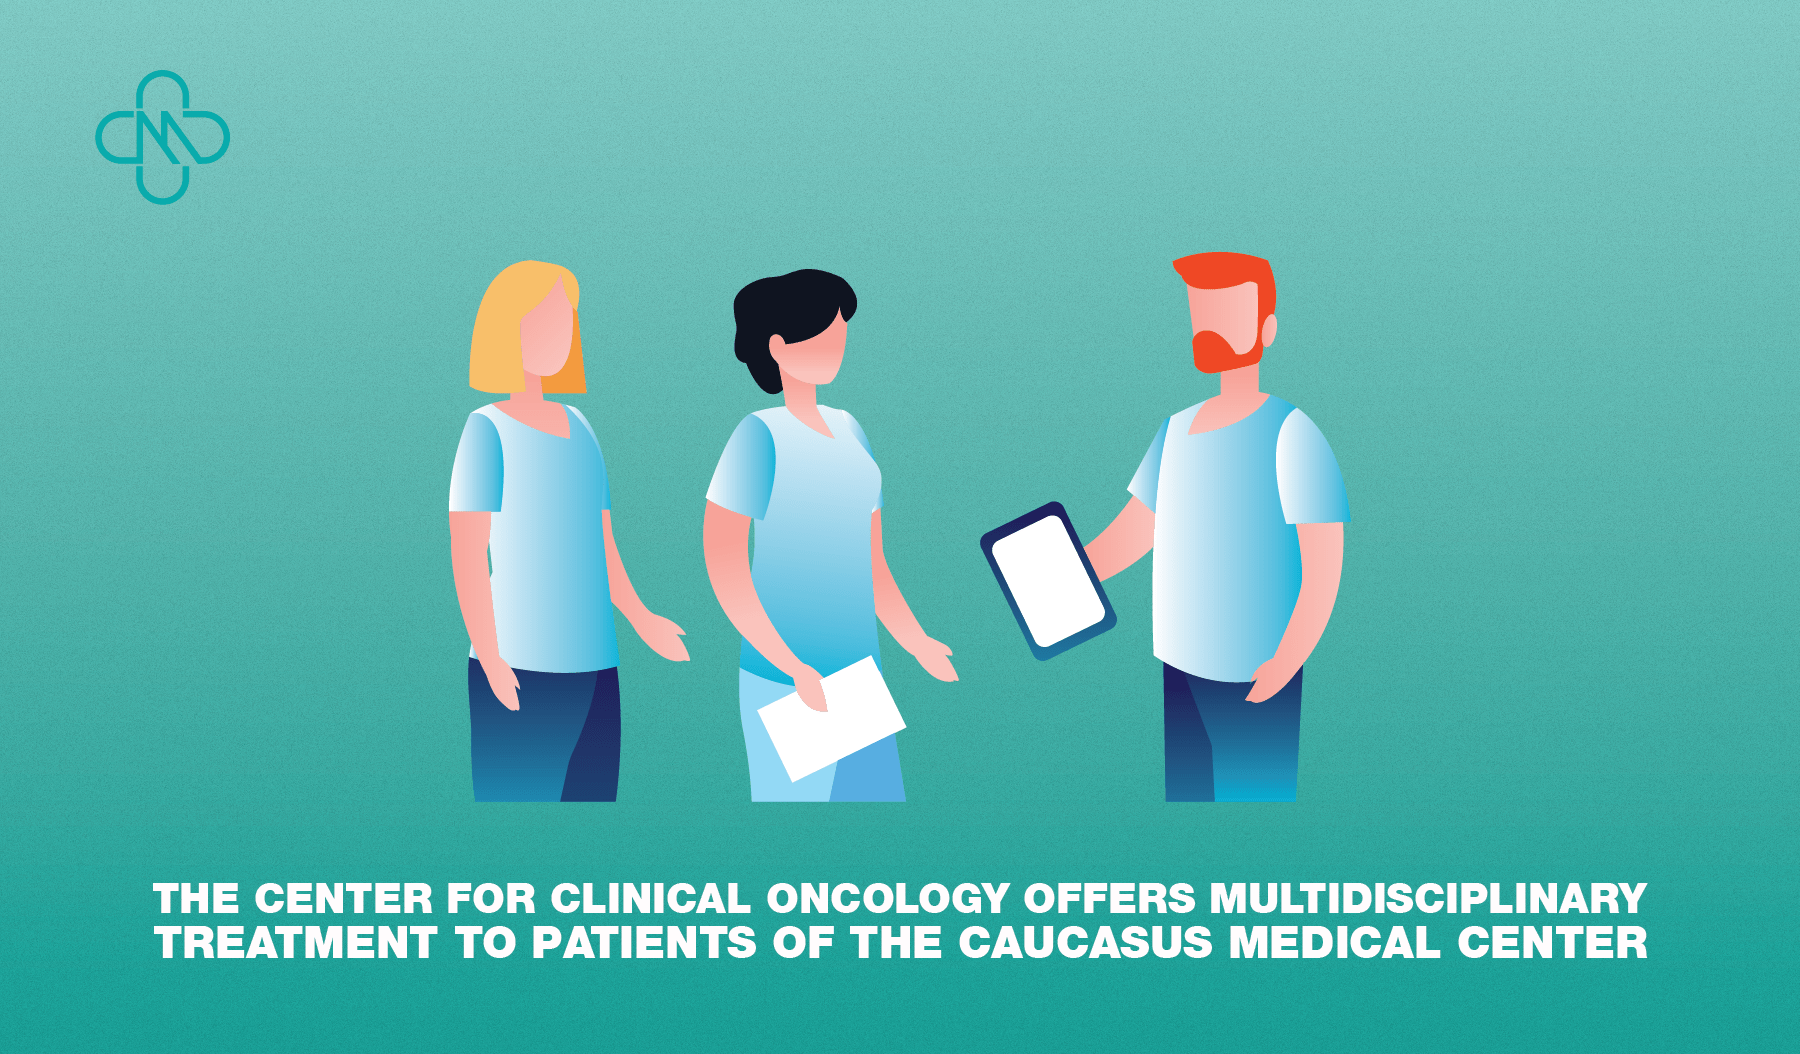 The Center for Clinical Oncology offers multidisciplinary treatment to patients of the Caucasus Medical Center